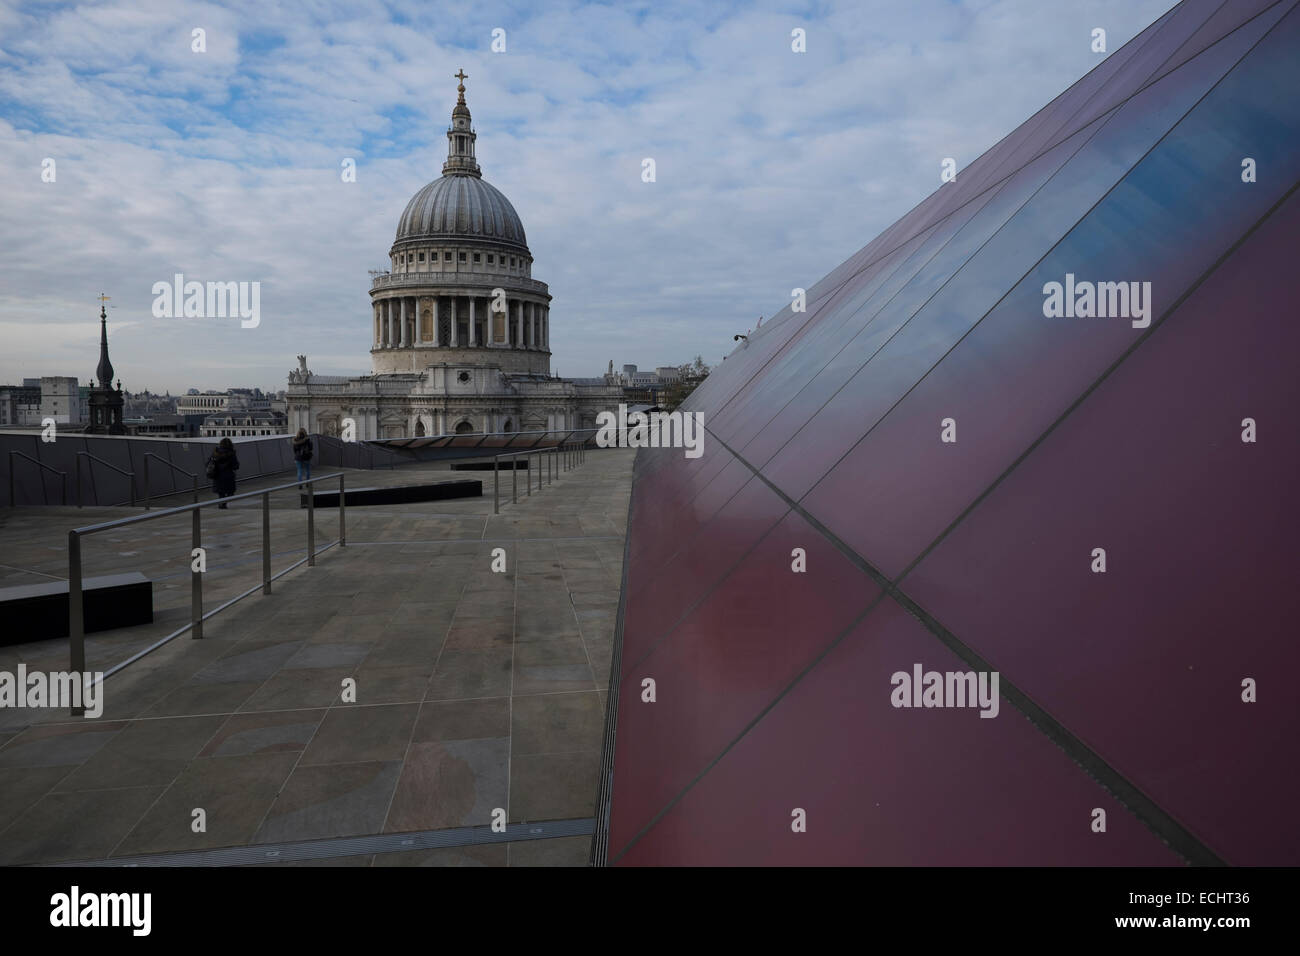 General view images of and around St Paul's Cathedral in London, UK Stock Photo